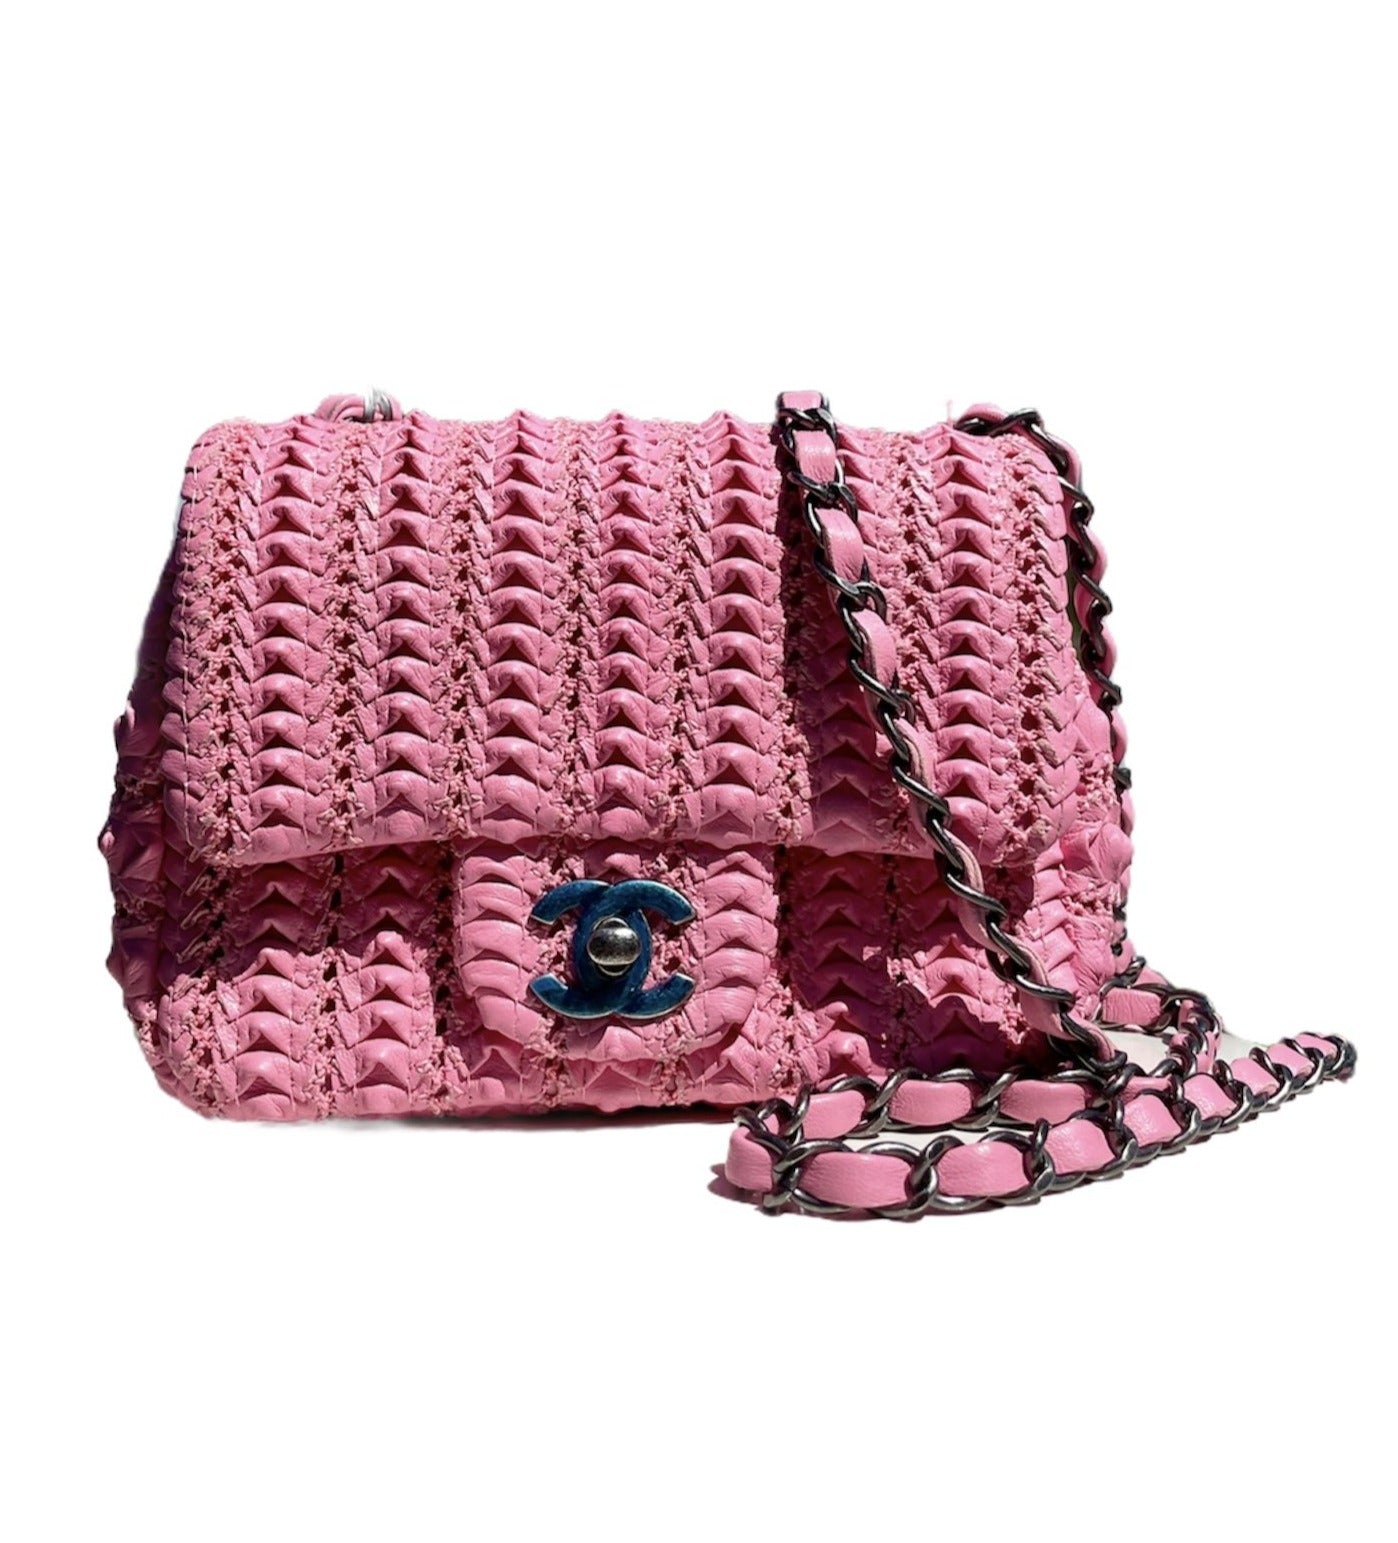 Chanel Pink Quilted Lambskin Mini Flap Bag Never Carried